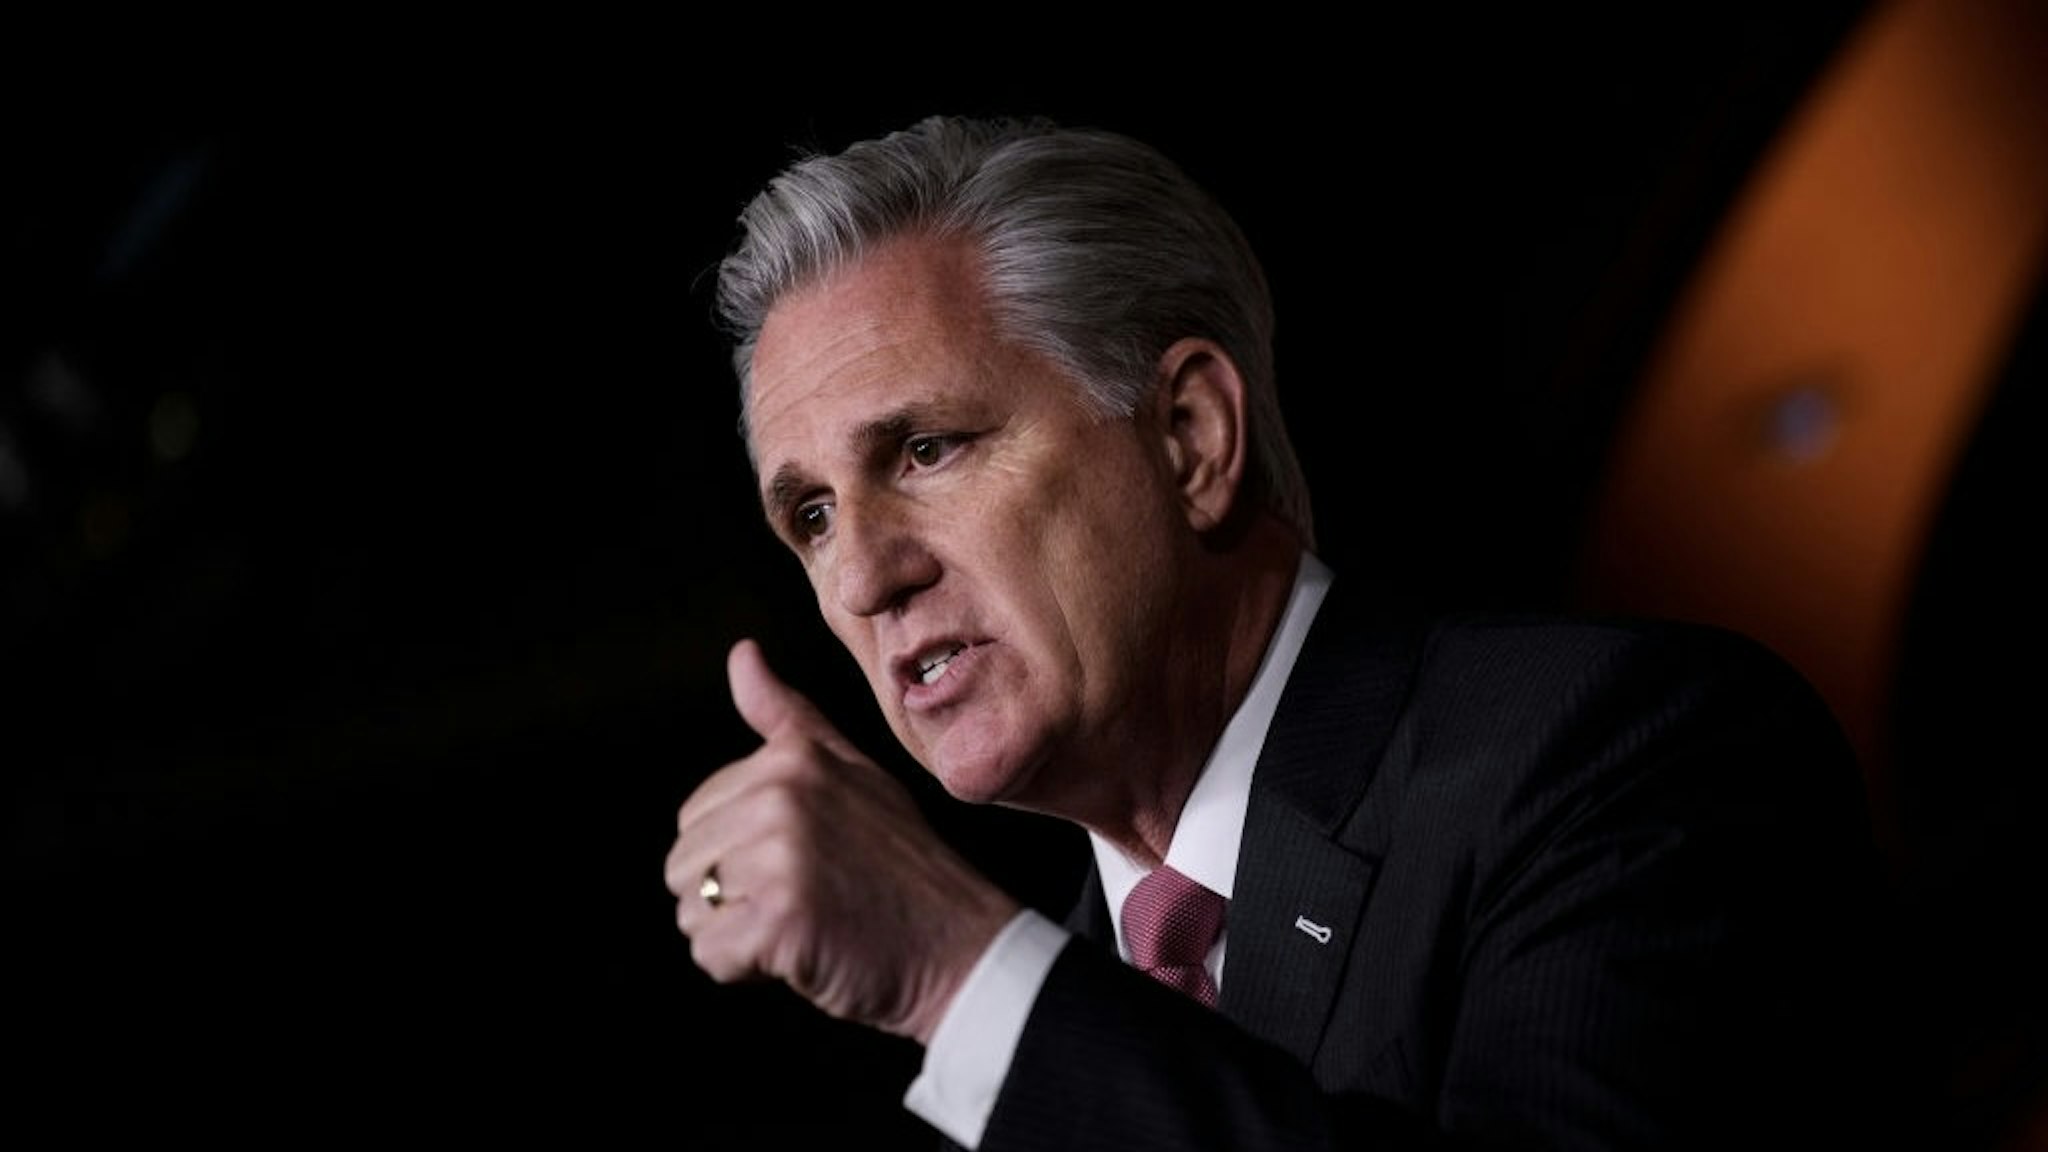 House Minority Leader Kevin McCarthy, Republican of California, speaks during his weekly press briefing on Capitol Hill, January 9, 2020, in Washington, DC. (Photo by Brendan Smialowski / AFP)